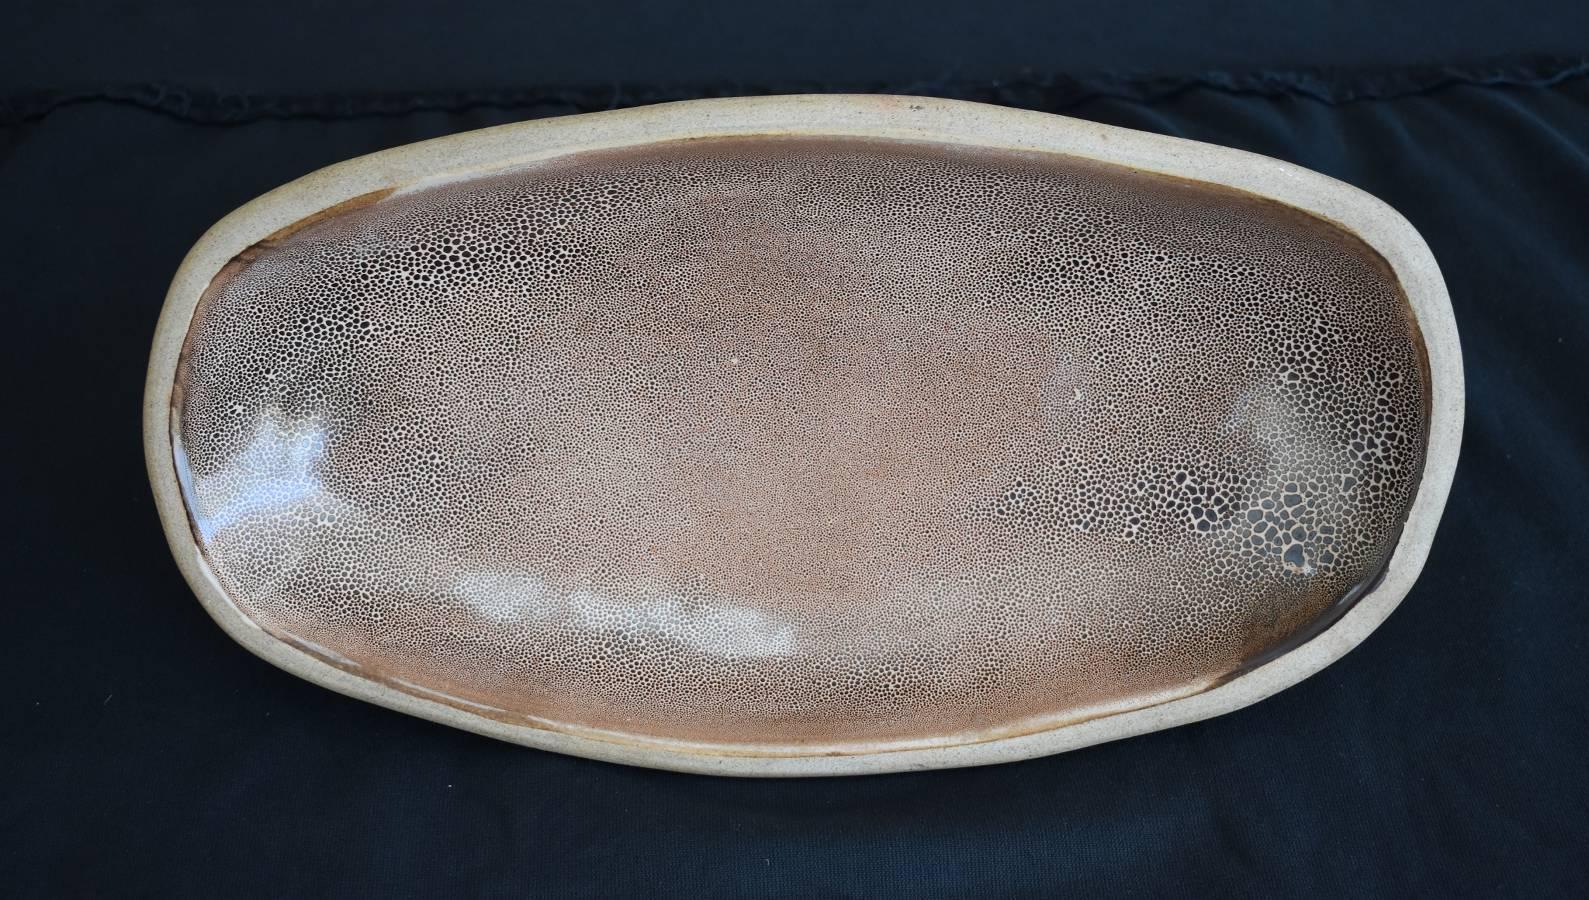 "AWESOME LARGE OIL SPOT BOWL"  Master Glazer brown and beige earthtones - Art by Harding Black